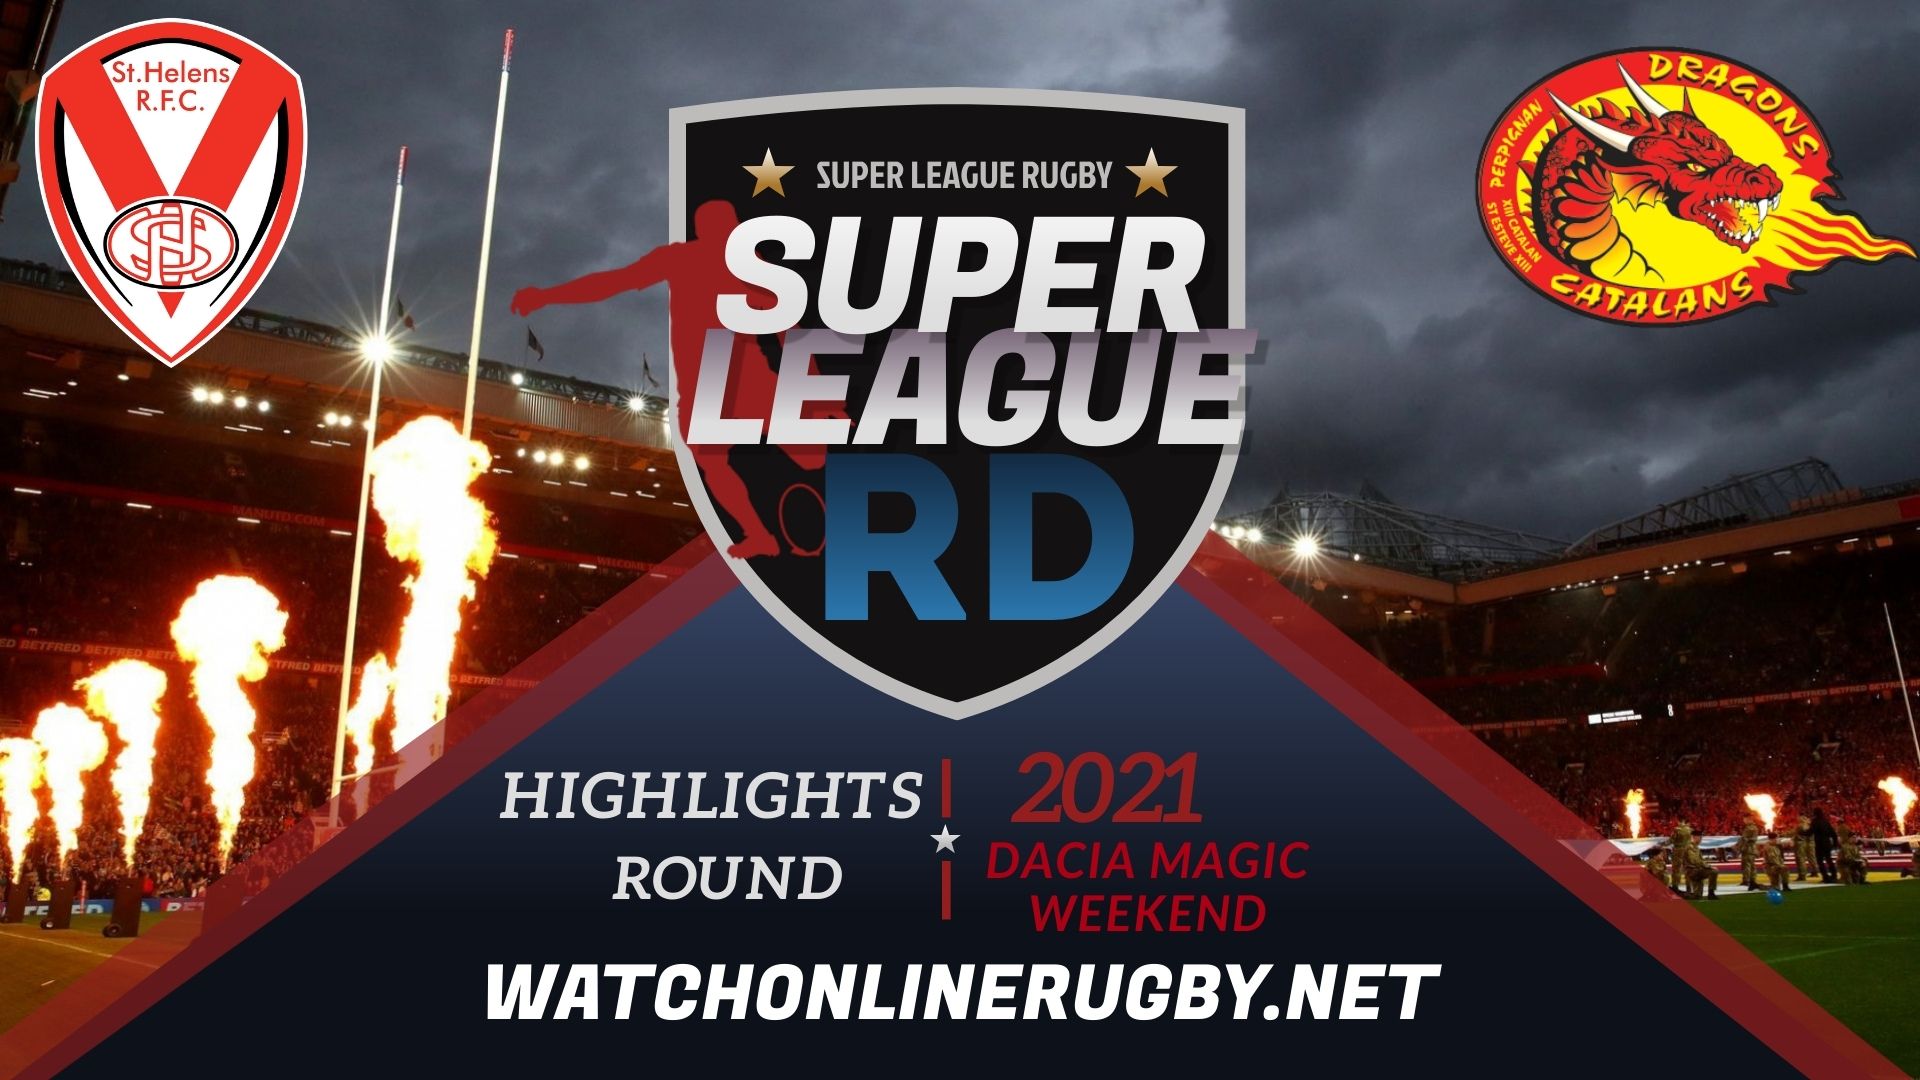 St Helens Vs Catalans Dragons Super League Rugby 2021 RD Dacia Magic Weekend